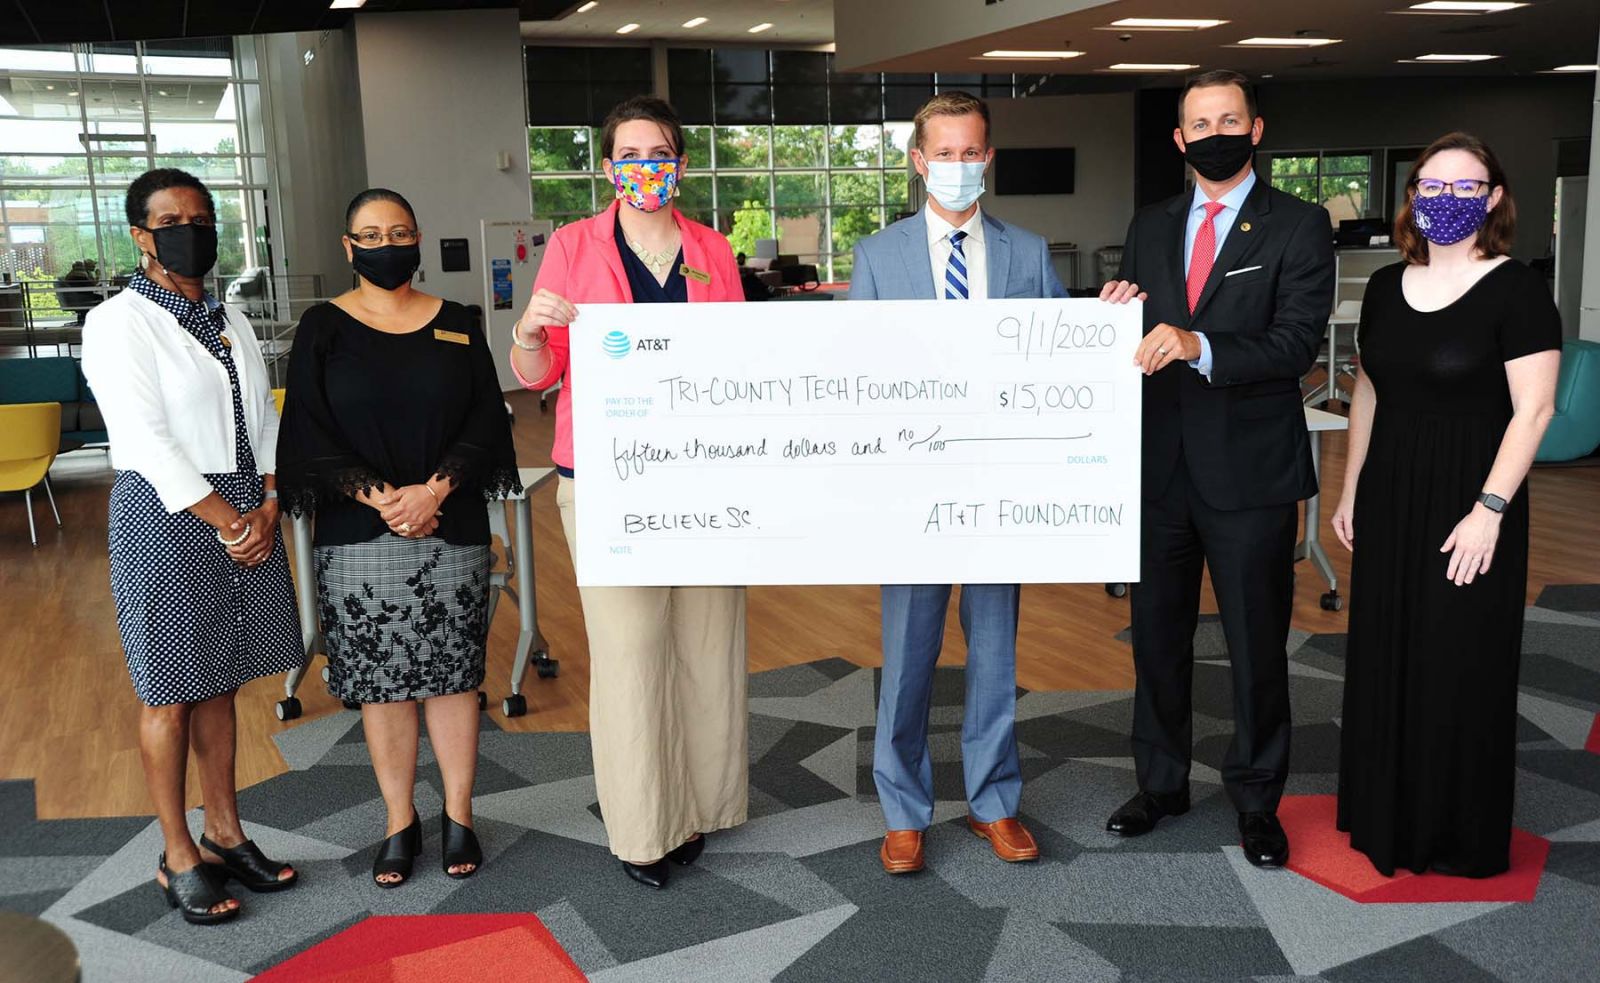 Representatives from Tri-County Technical College pose with the $15,000 check donated from AT&T. (Photo/Provided)